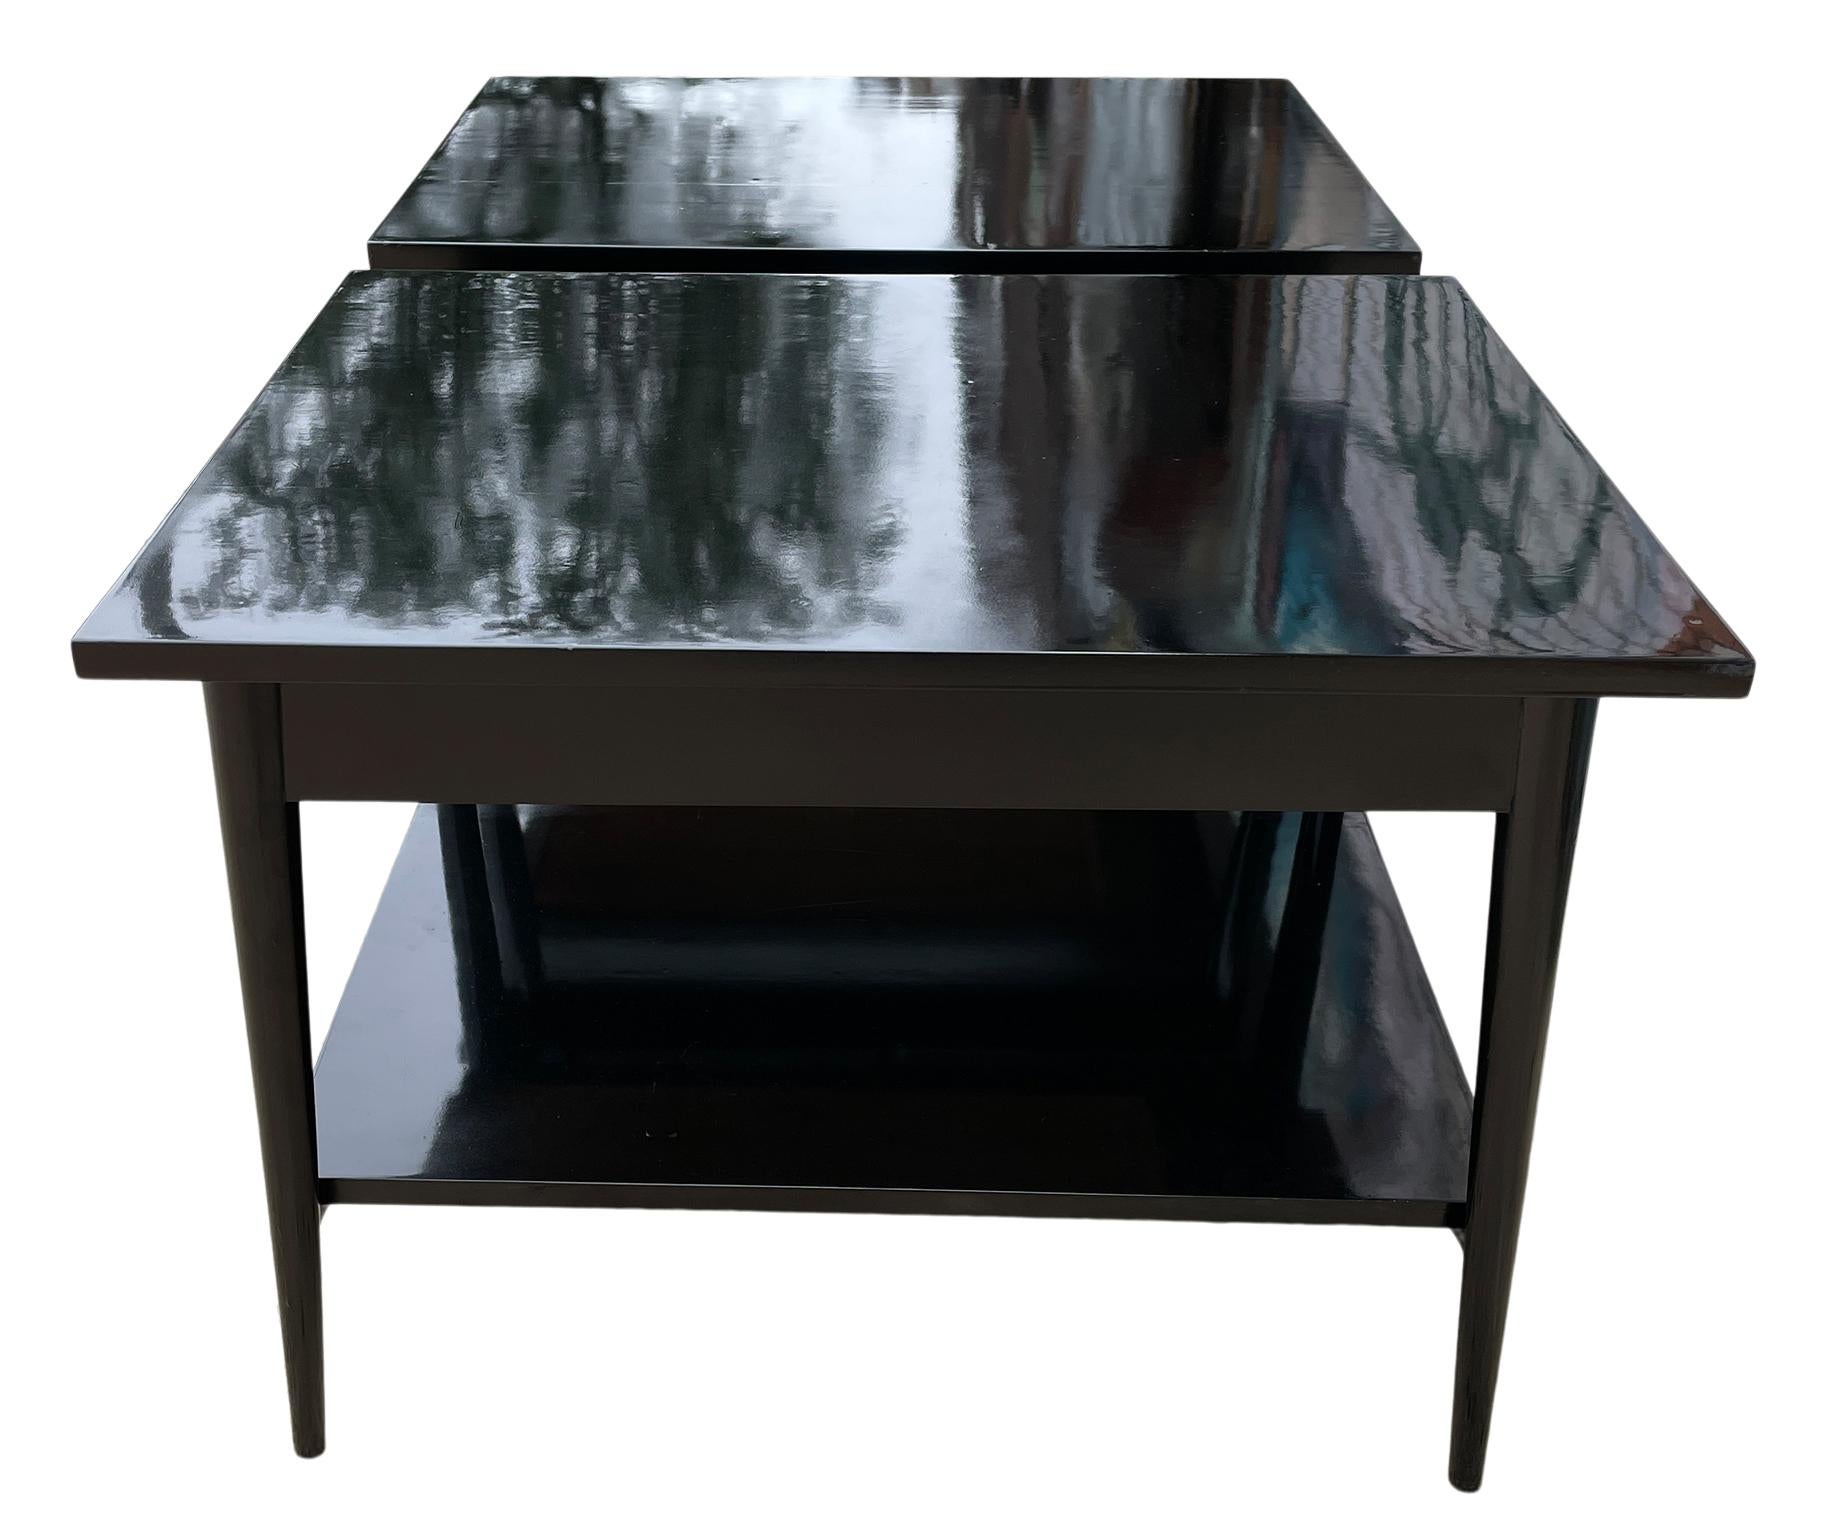 20th Century Midcentury Paul McCobb #1587 Nightstands Gloss Black Lacquer Brass Knobs Tables